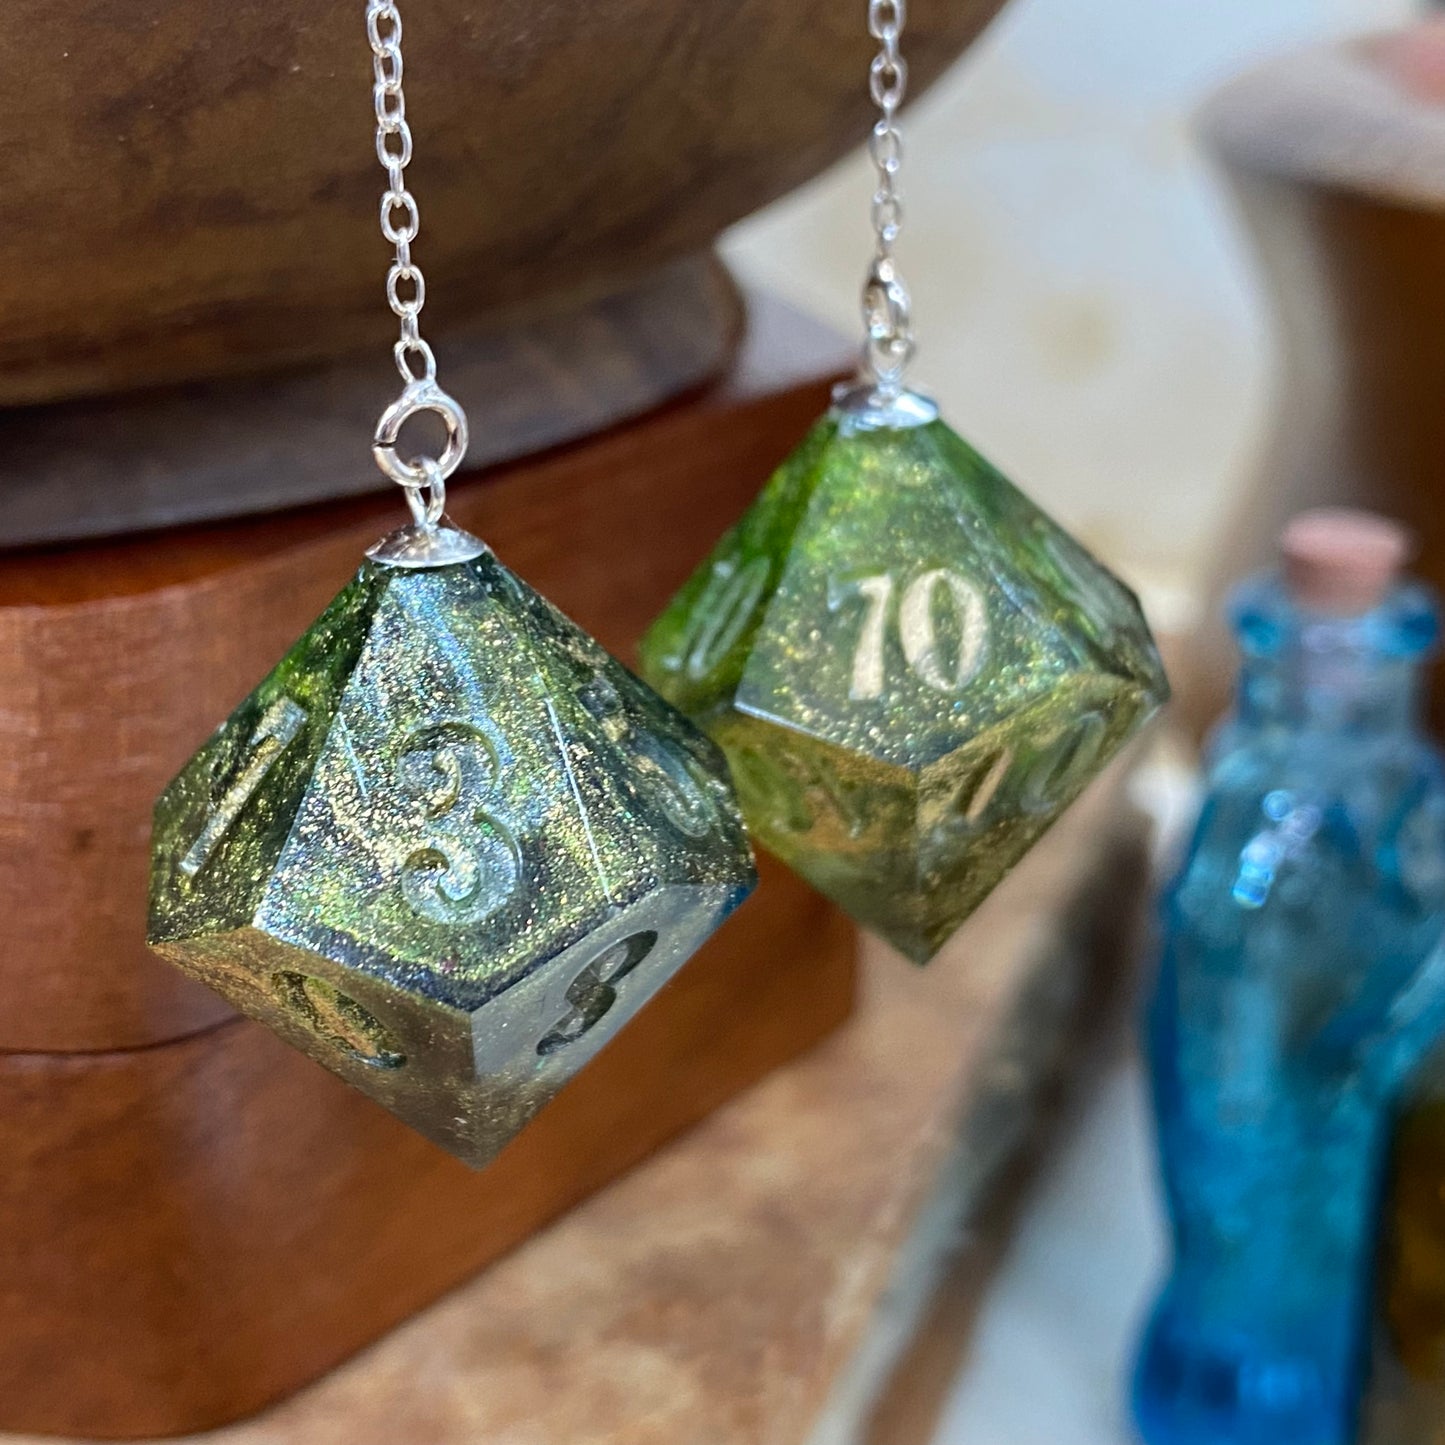 Green and Gold D%/ D10 Earrings